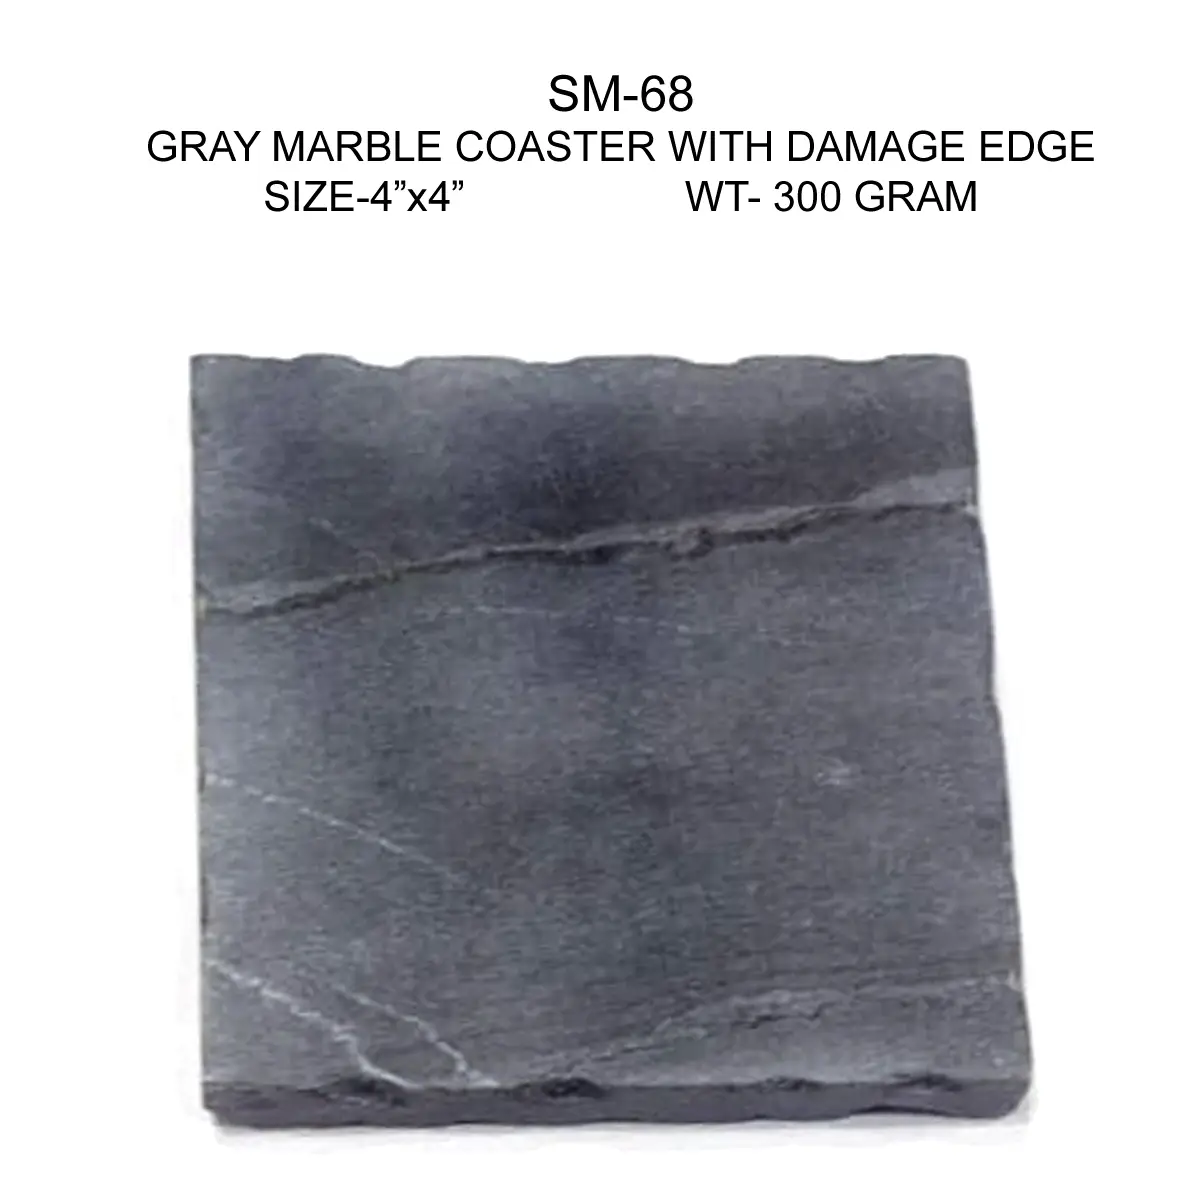 GRAY MARBLE COASTER WITH DAMAGE EDGE